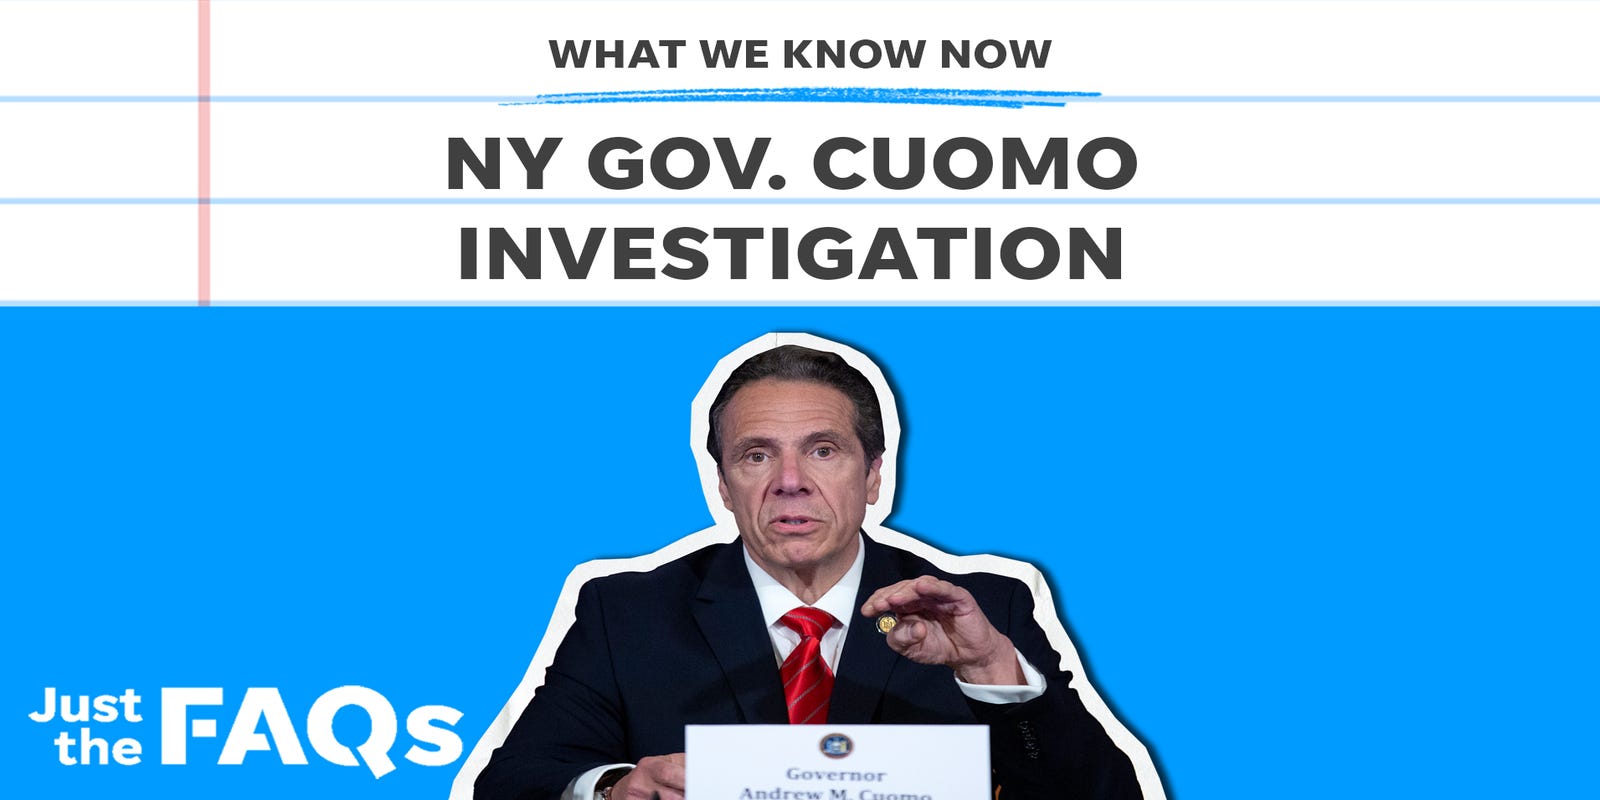 Gov. Cuomo faces possible impeachment, criminal charges: What we know | Just the FAQs